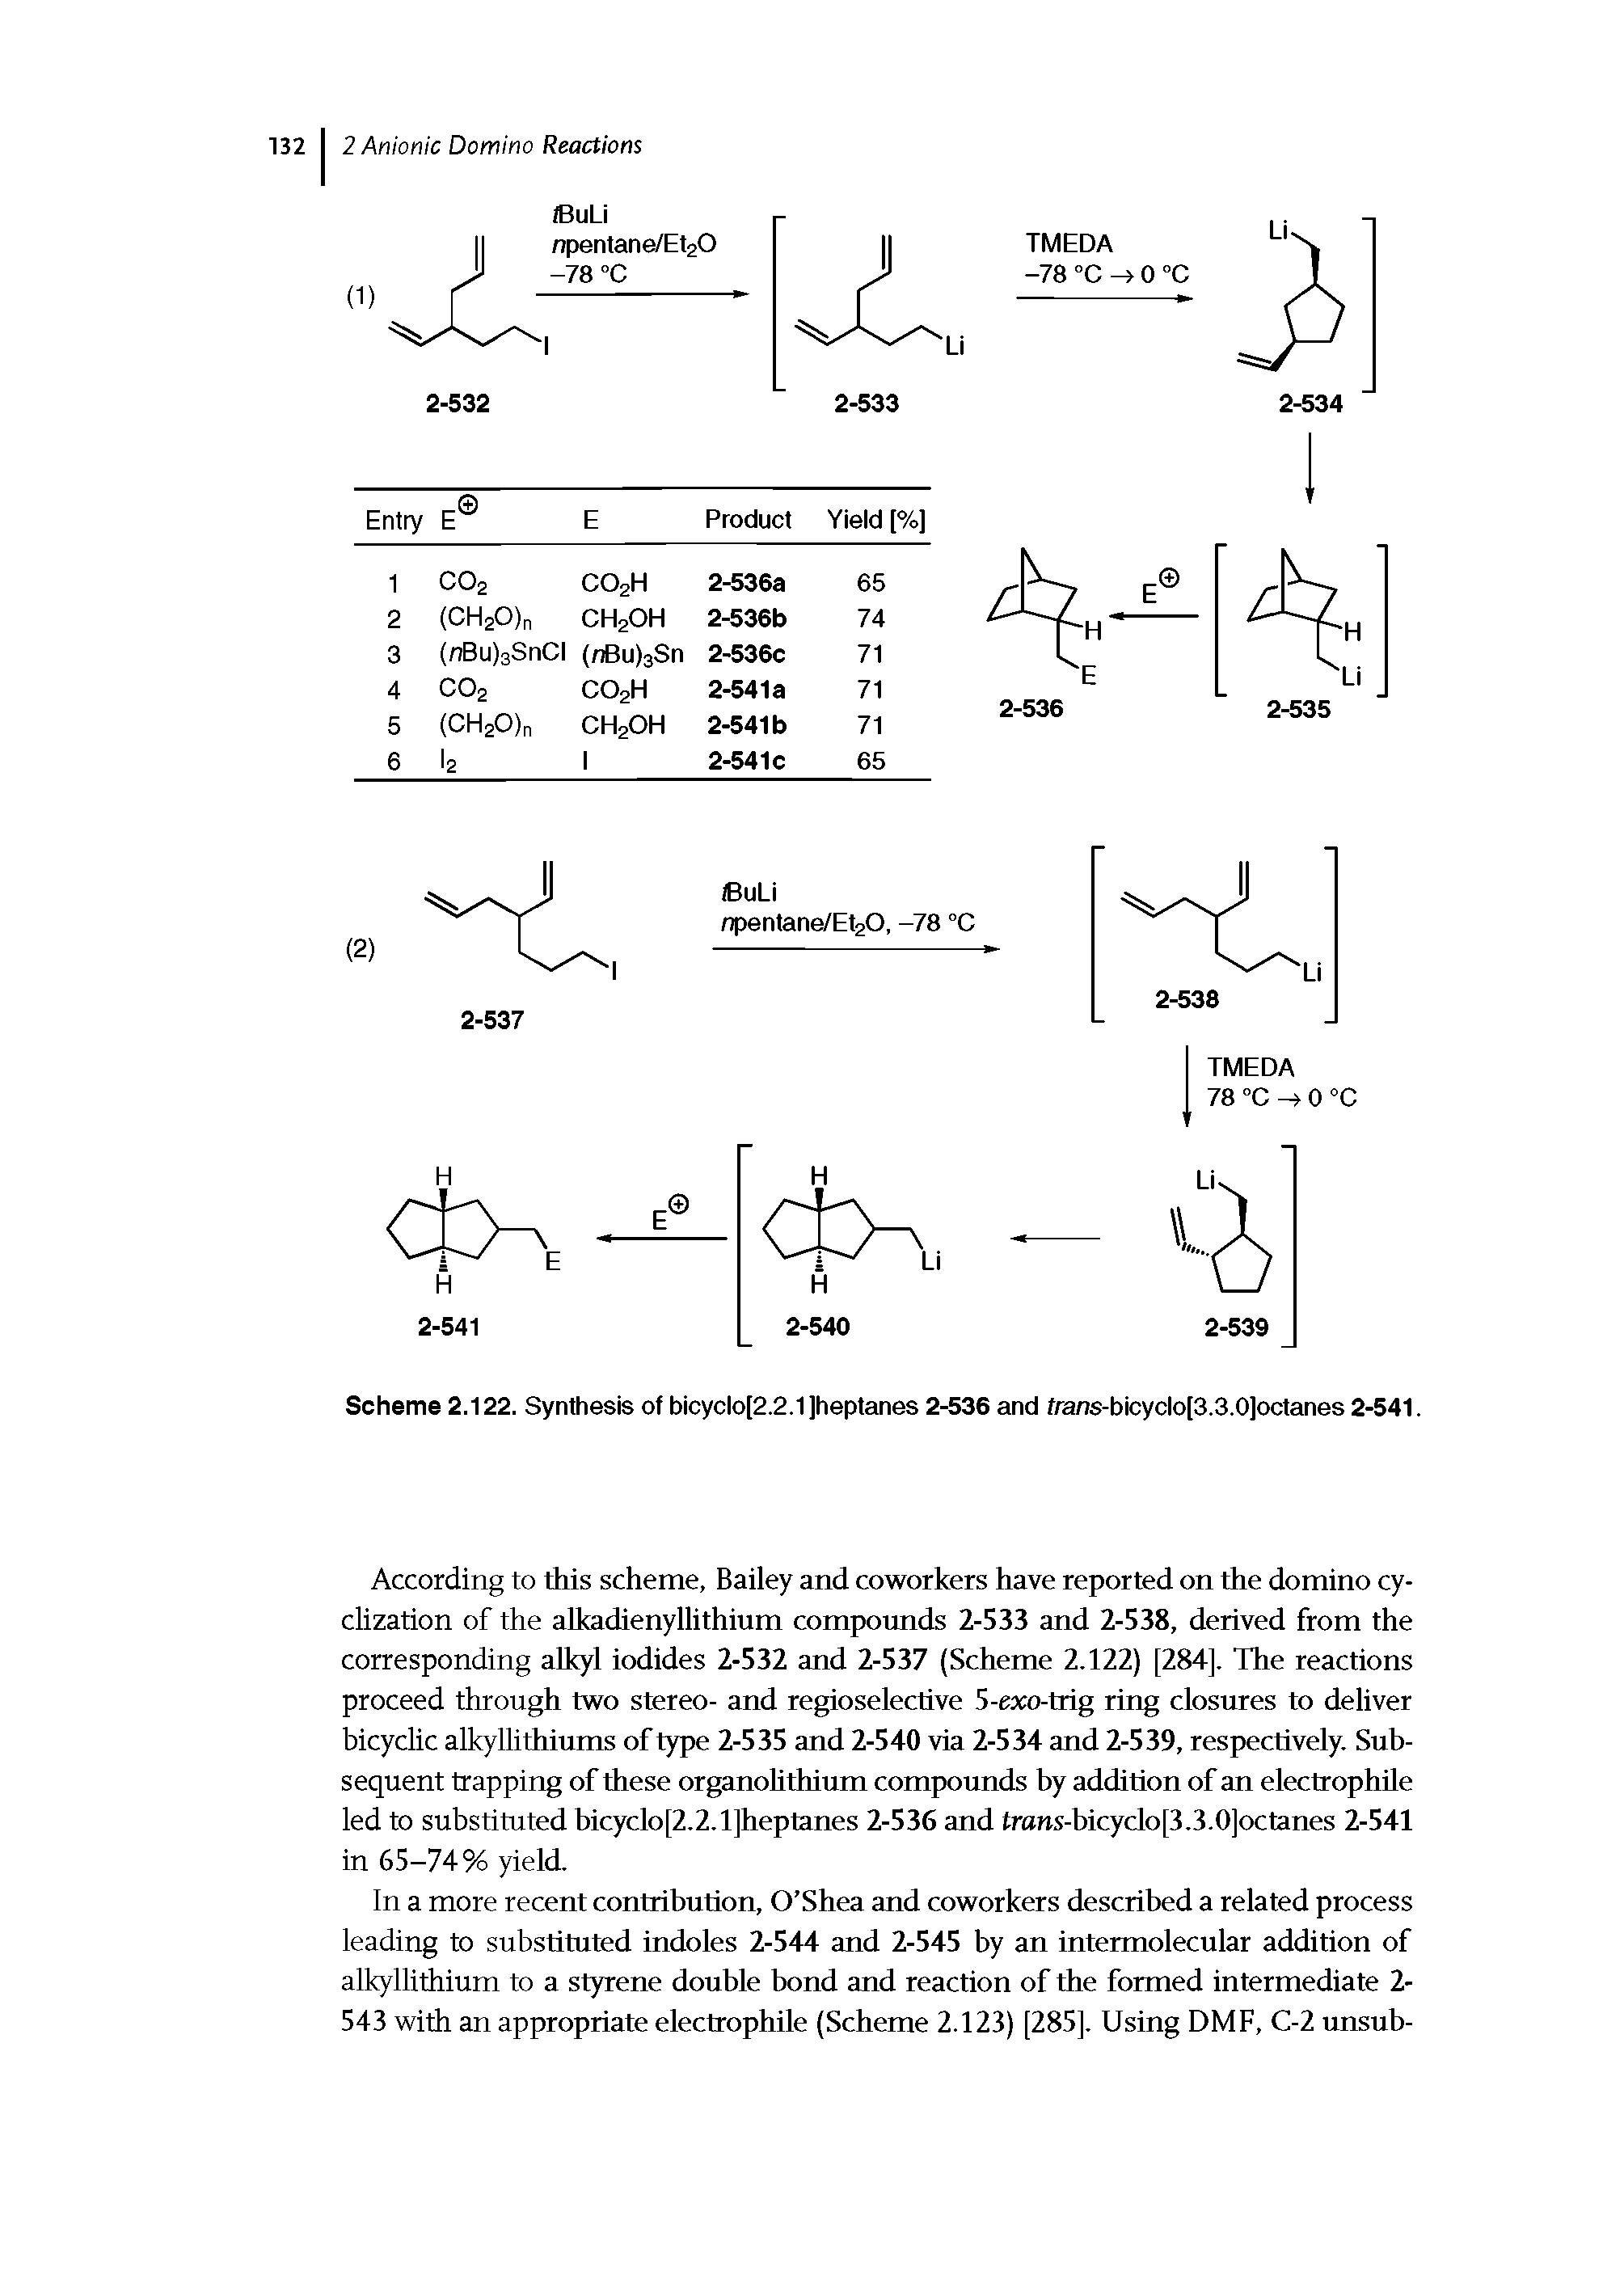 Scheme 2.122. Synthesis of bicyclo[2.2.1]heptanes 2-536 and frans-bicyclo[3.3.0]octanes 2-541.